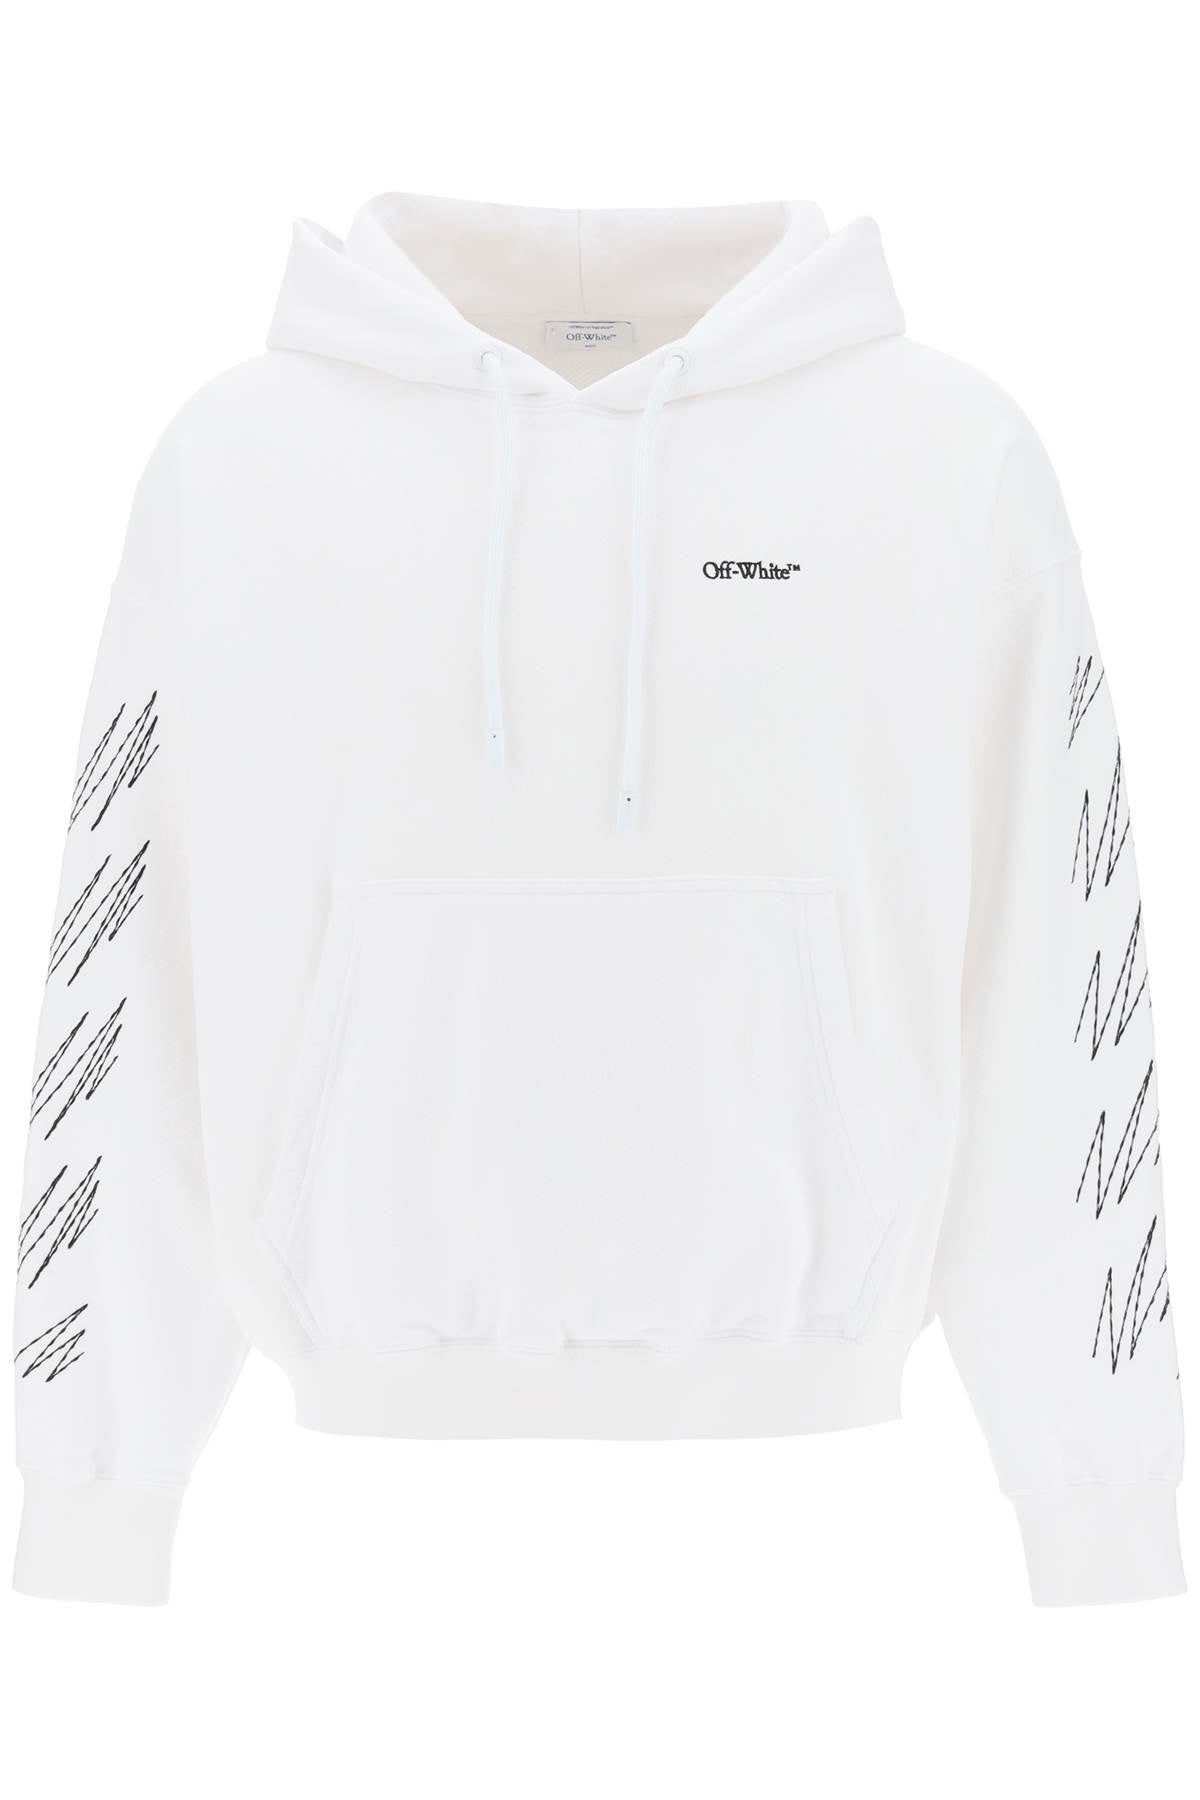 OFF-WHITE White Hoodie with Contrast Stitching - Men's French Terry Sweatshirt